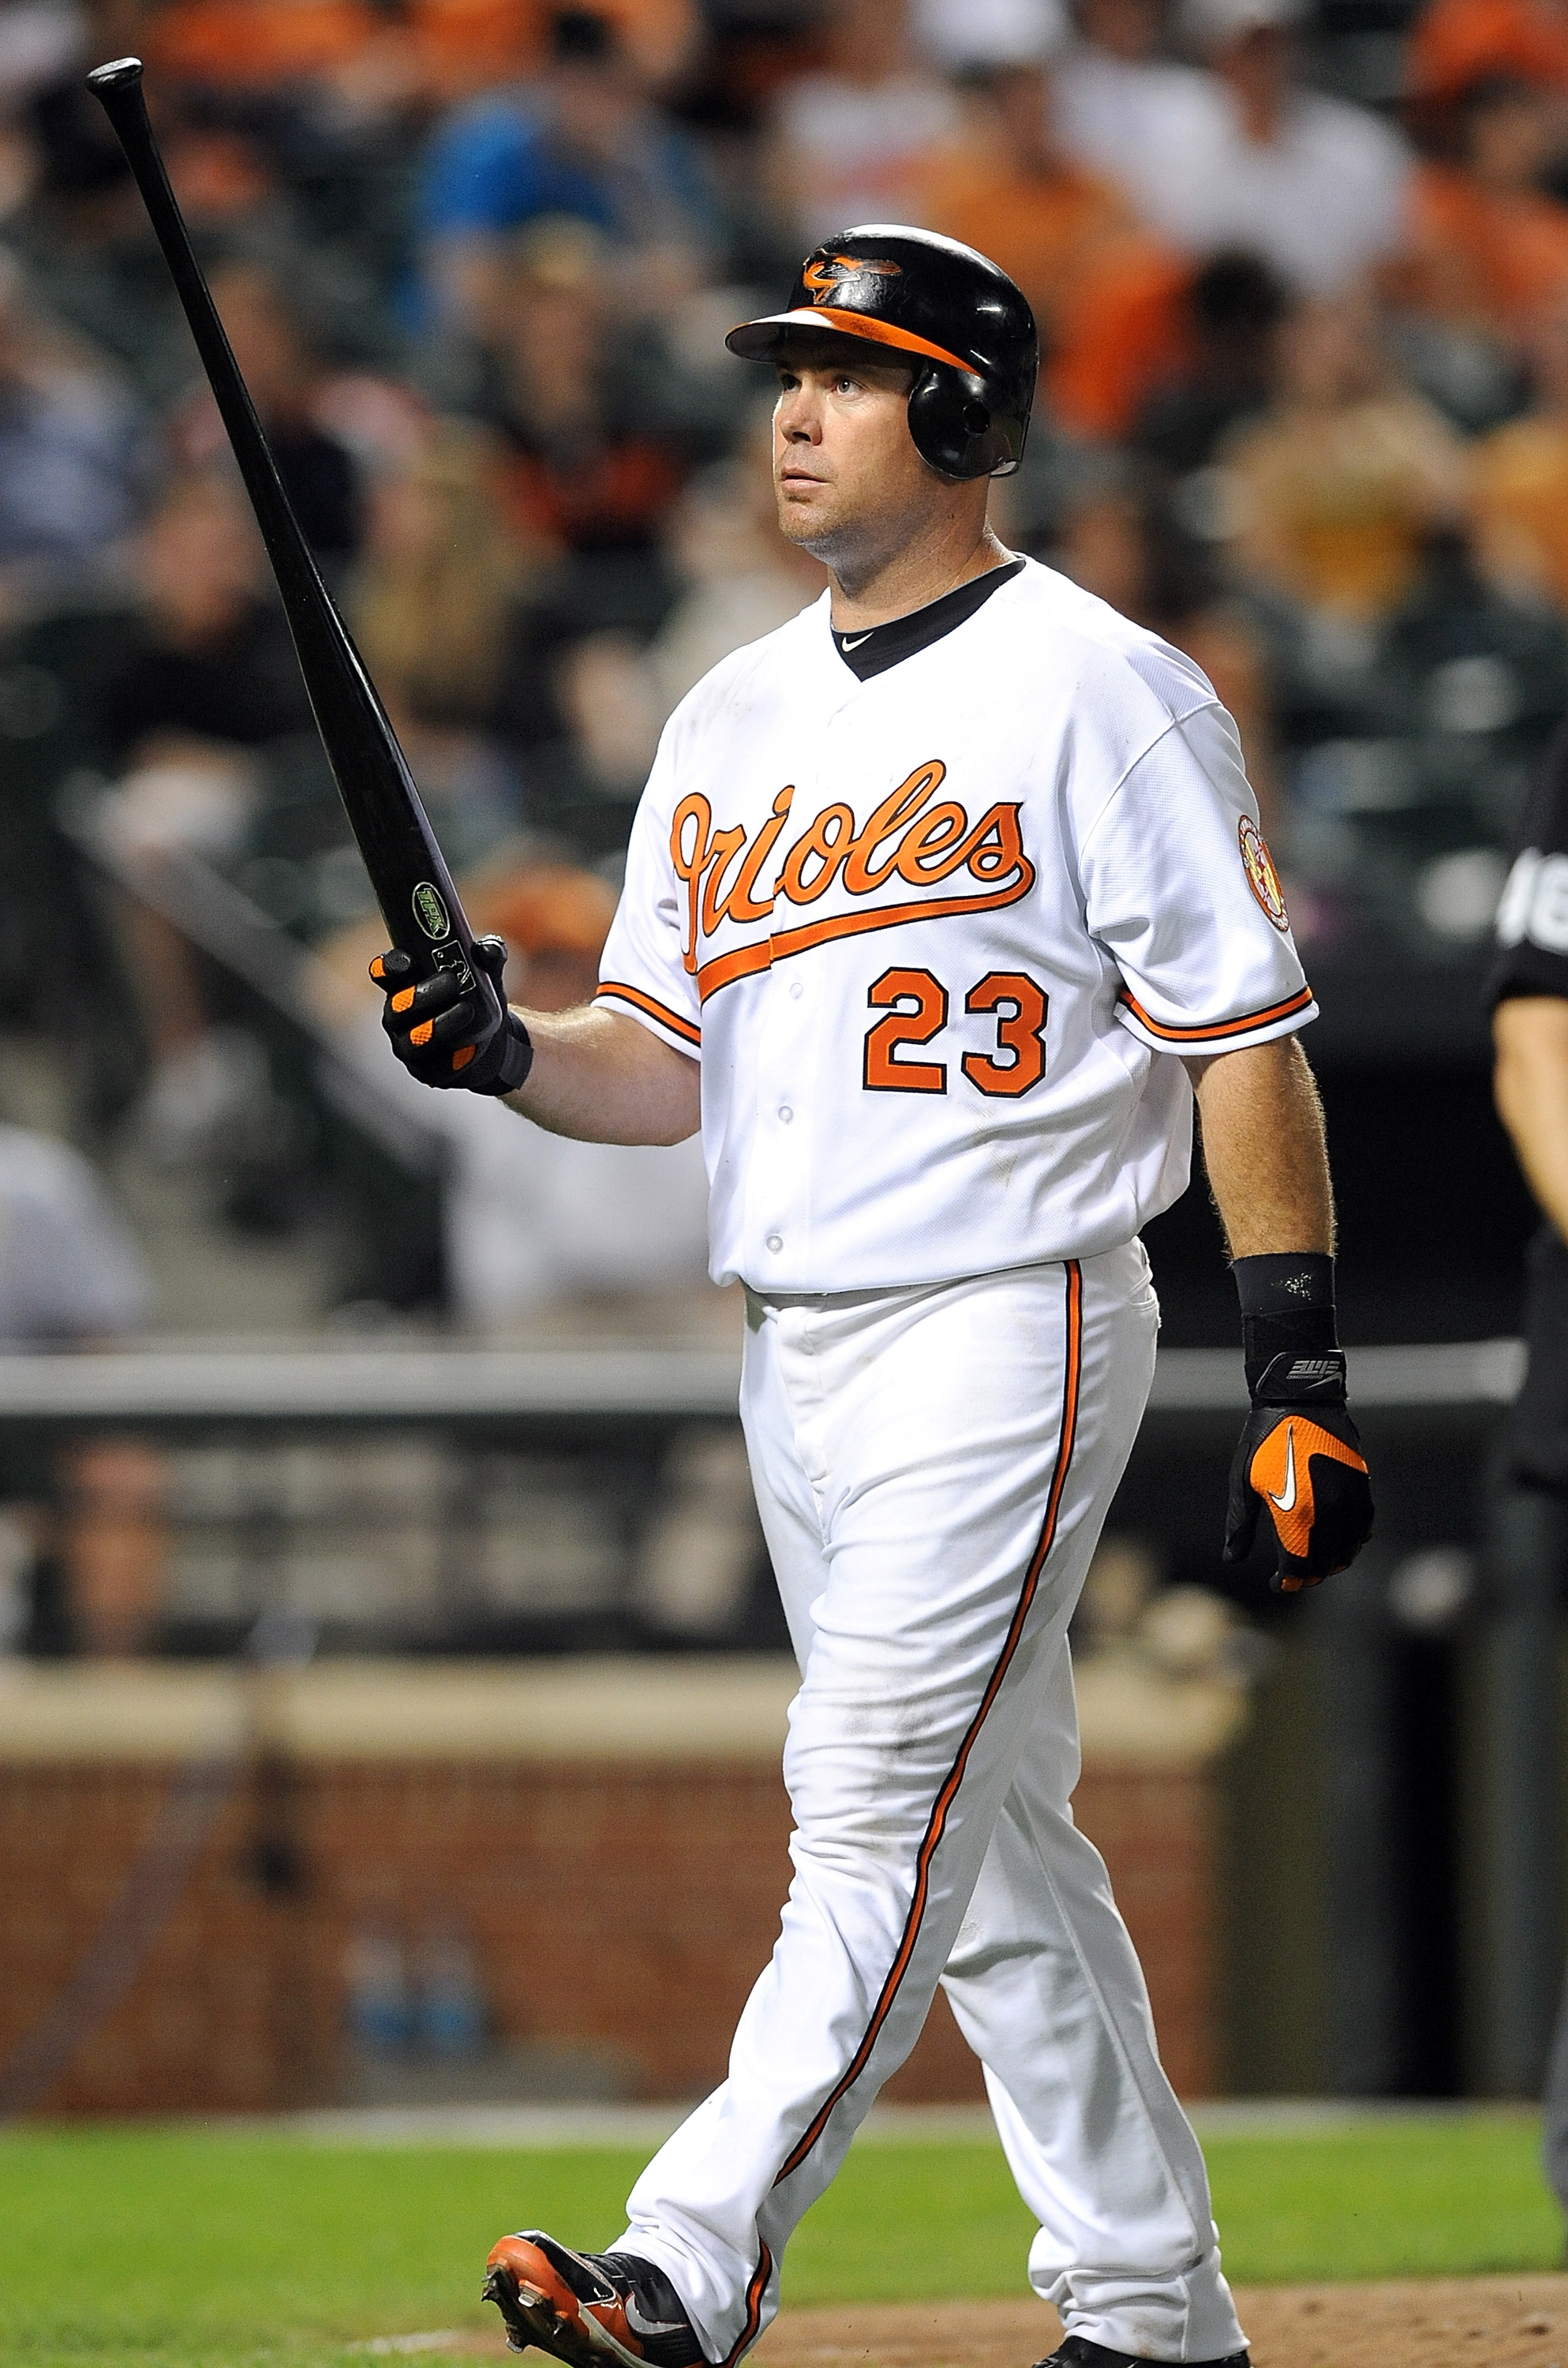 BALTIMORE - MAY 26:  Ty Wigginton #23 of the Baltimore Orioles walks to the dugout after striking out against the Oakland Athletics at Camden Yards on May 26, 2010 in Baltimore, Maryland.  (Photo by Greg Fiume/Getty Images)